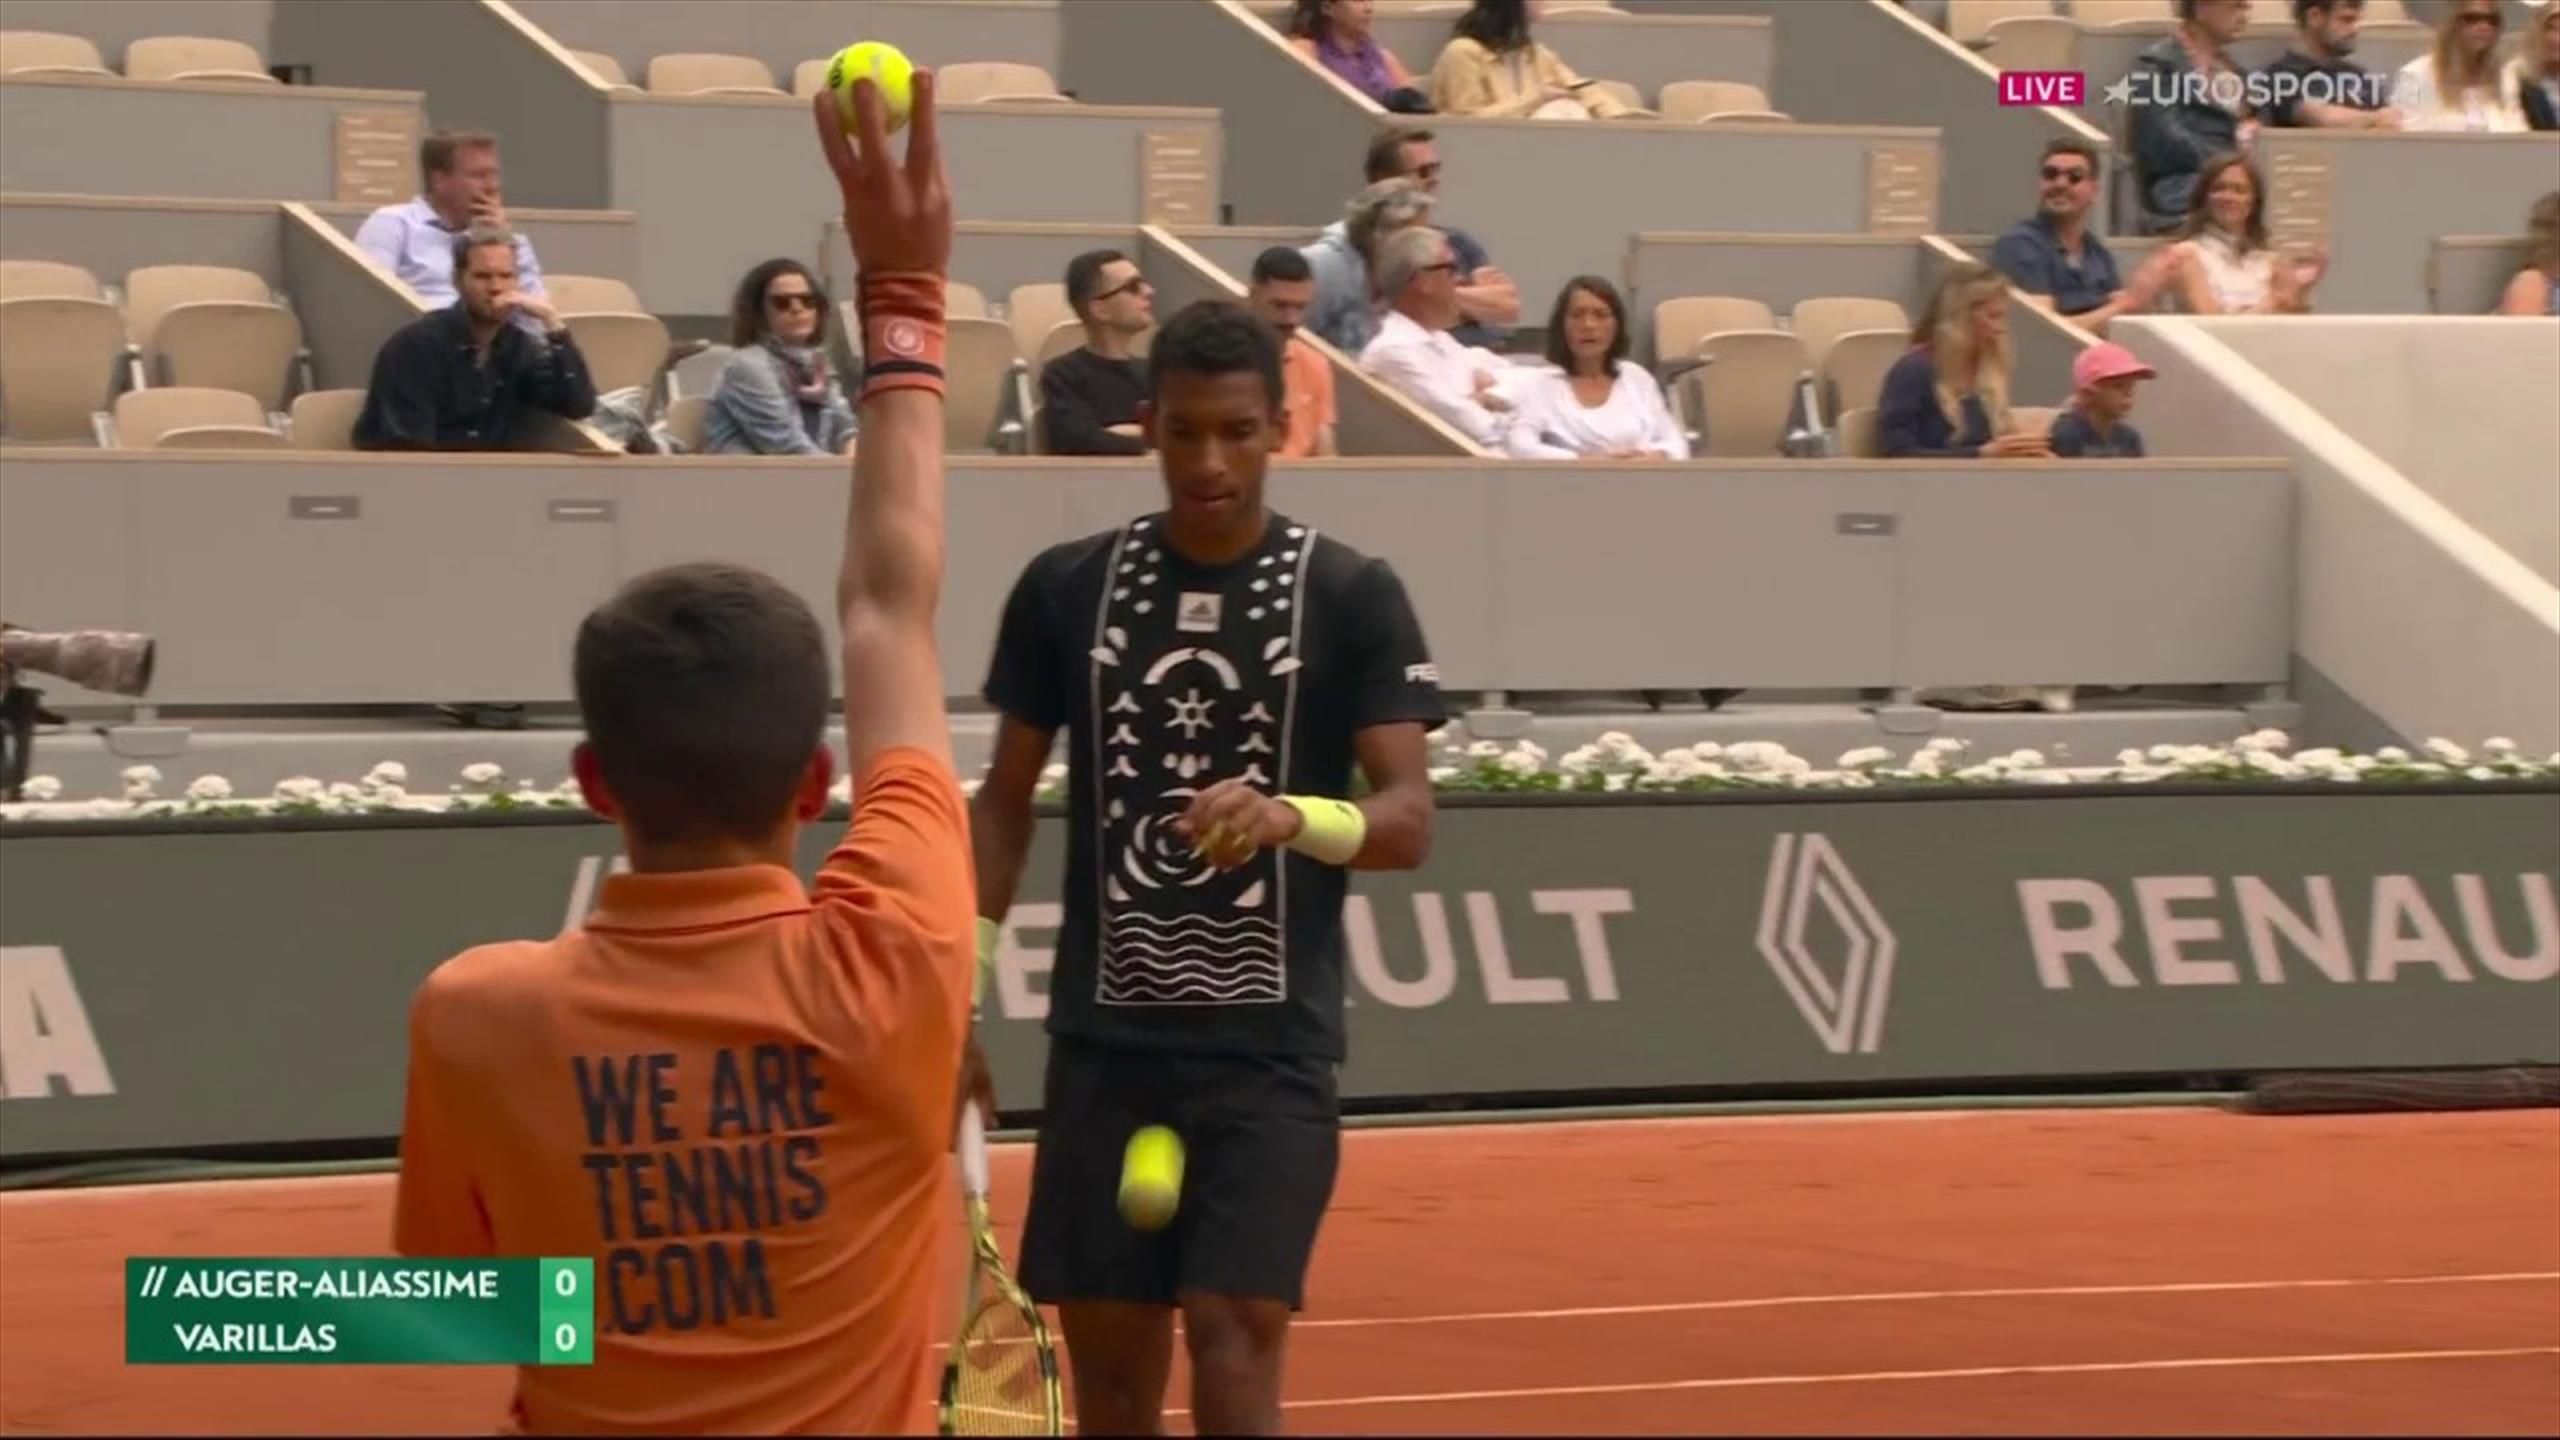 Very nice start - Felix Auger-Aliassime begins match with delicious winner at 2022 French Open - Tennis video